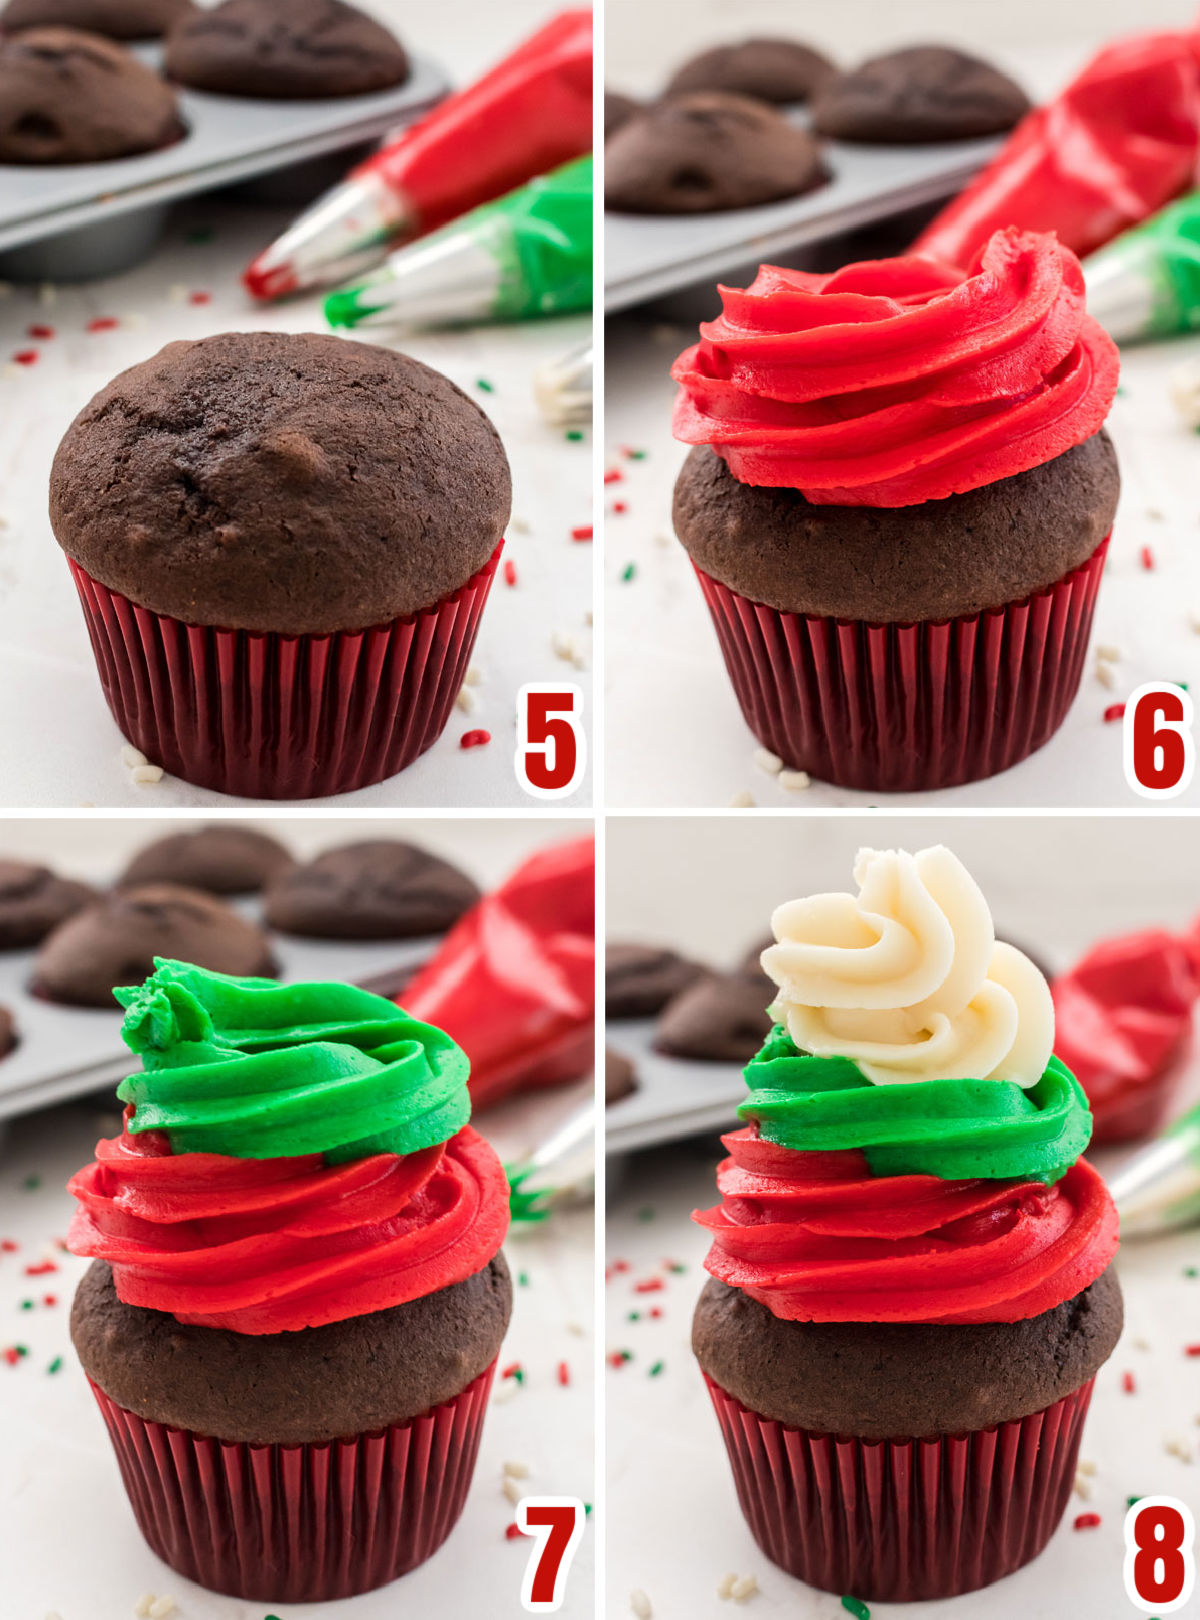 Collage image showing the steps for making the Christmas Swirl of frosting on the chocolate cupcake.